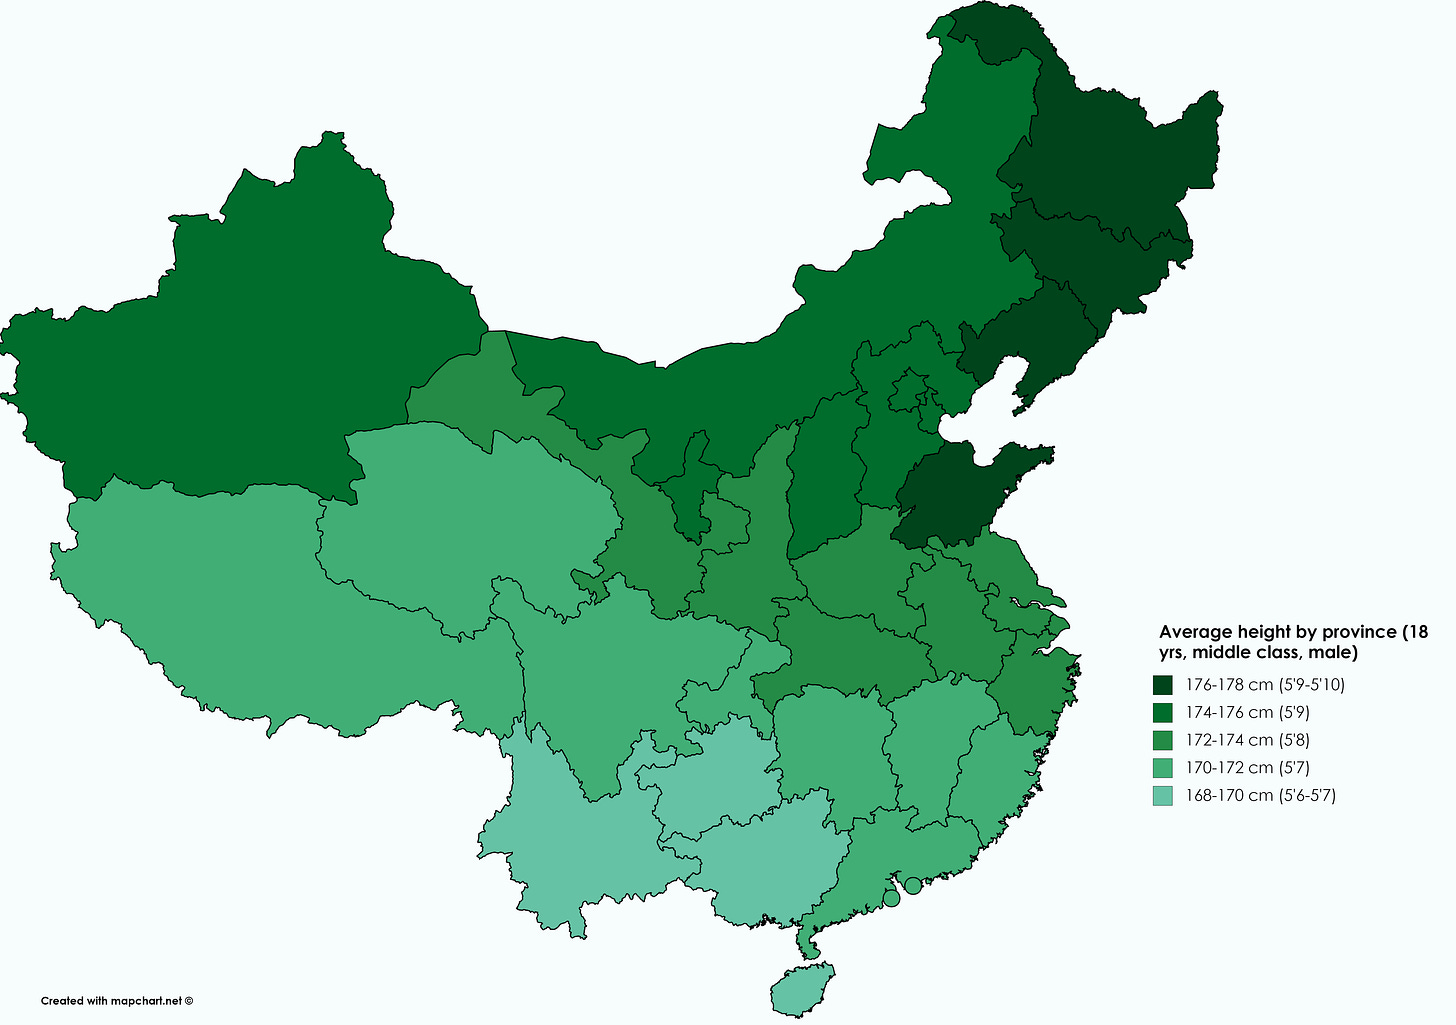 r/China - Average height in China by region, 2018 (edited and revised)